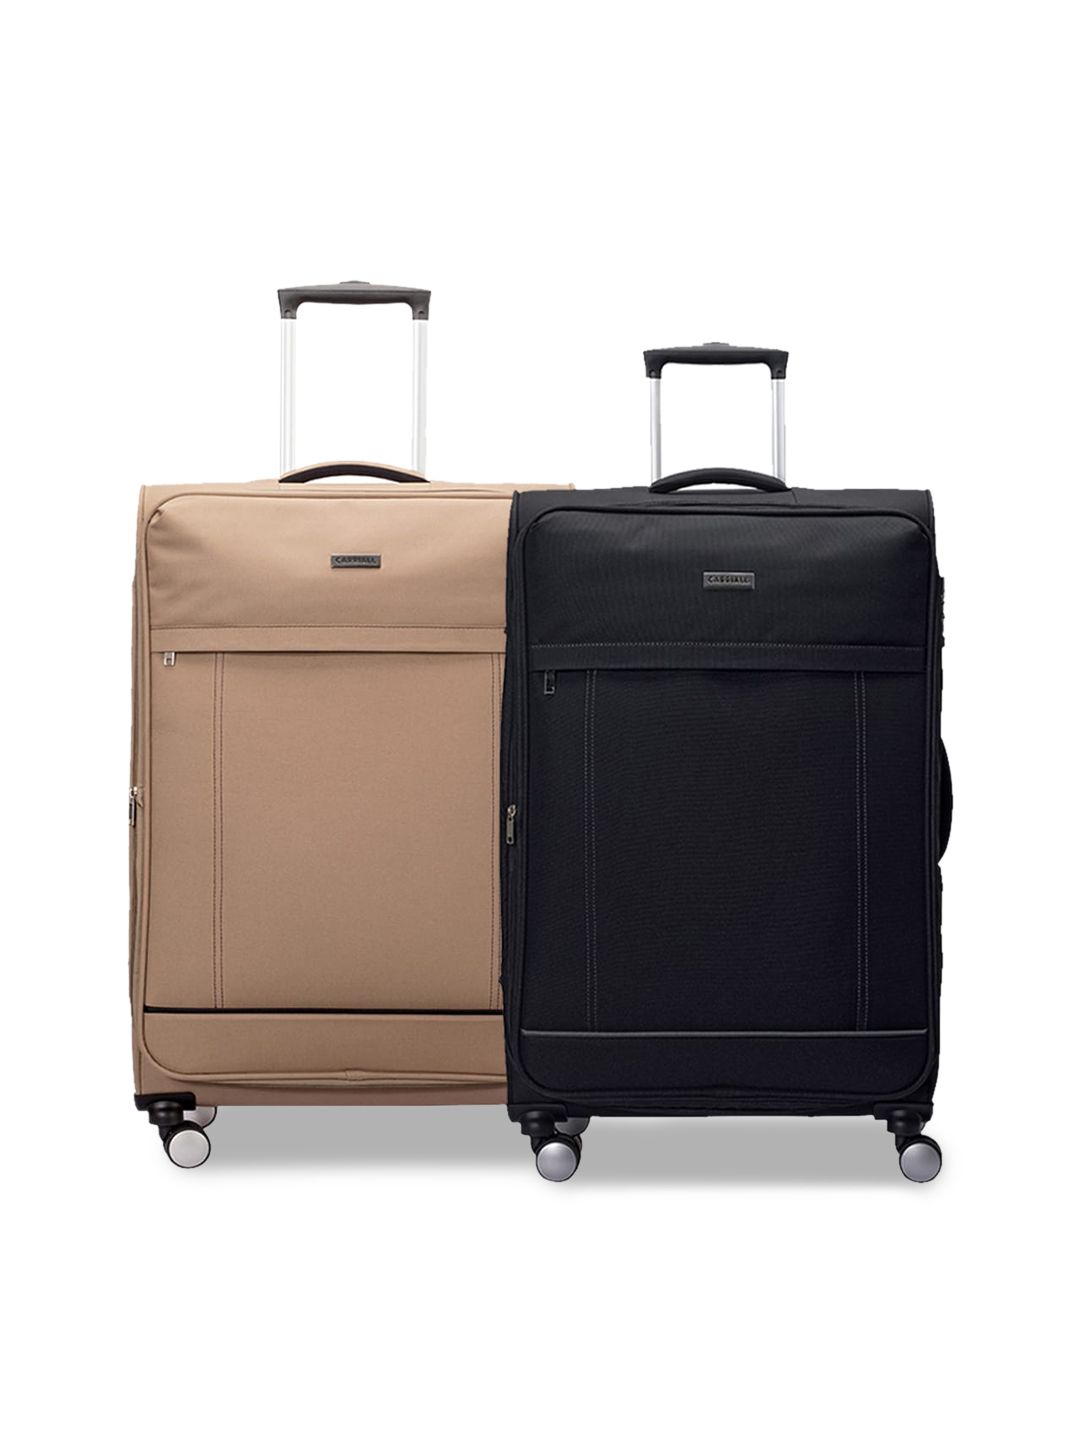 CARRIALL Black & Beige Large Combo Set of 2 Luggage Price in India